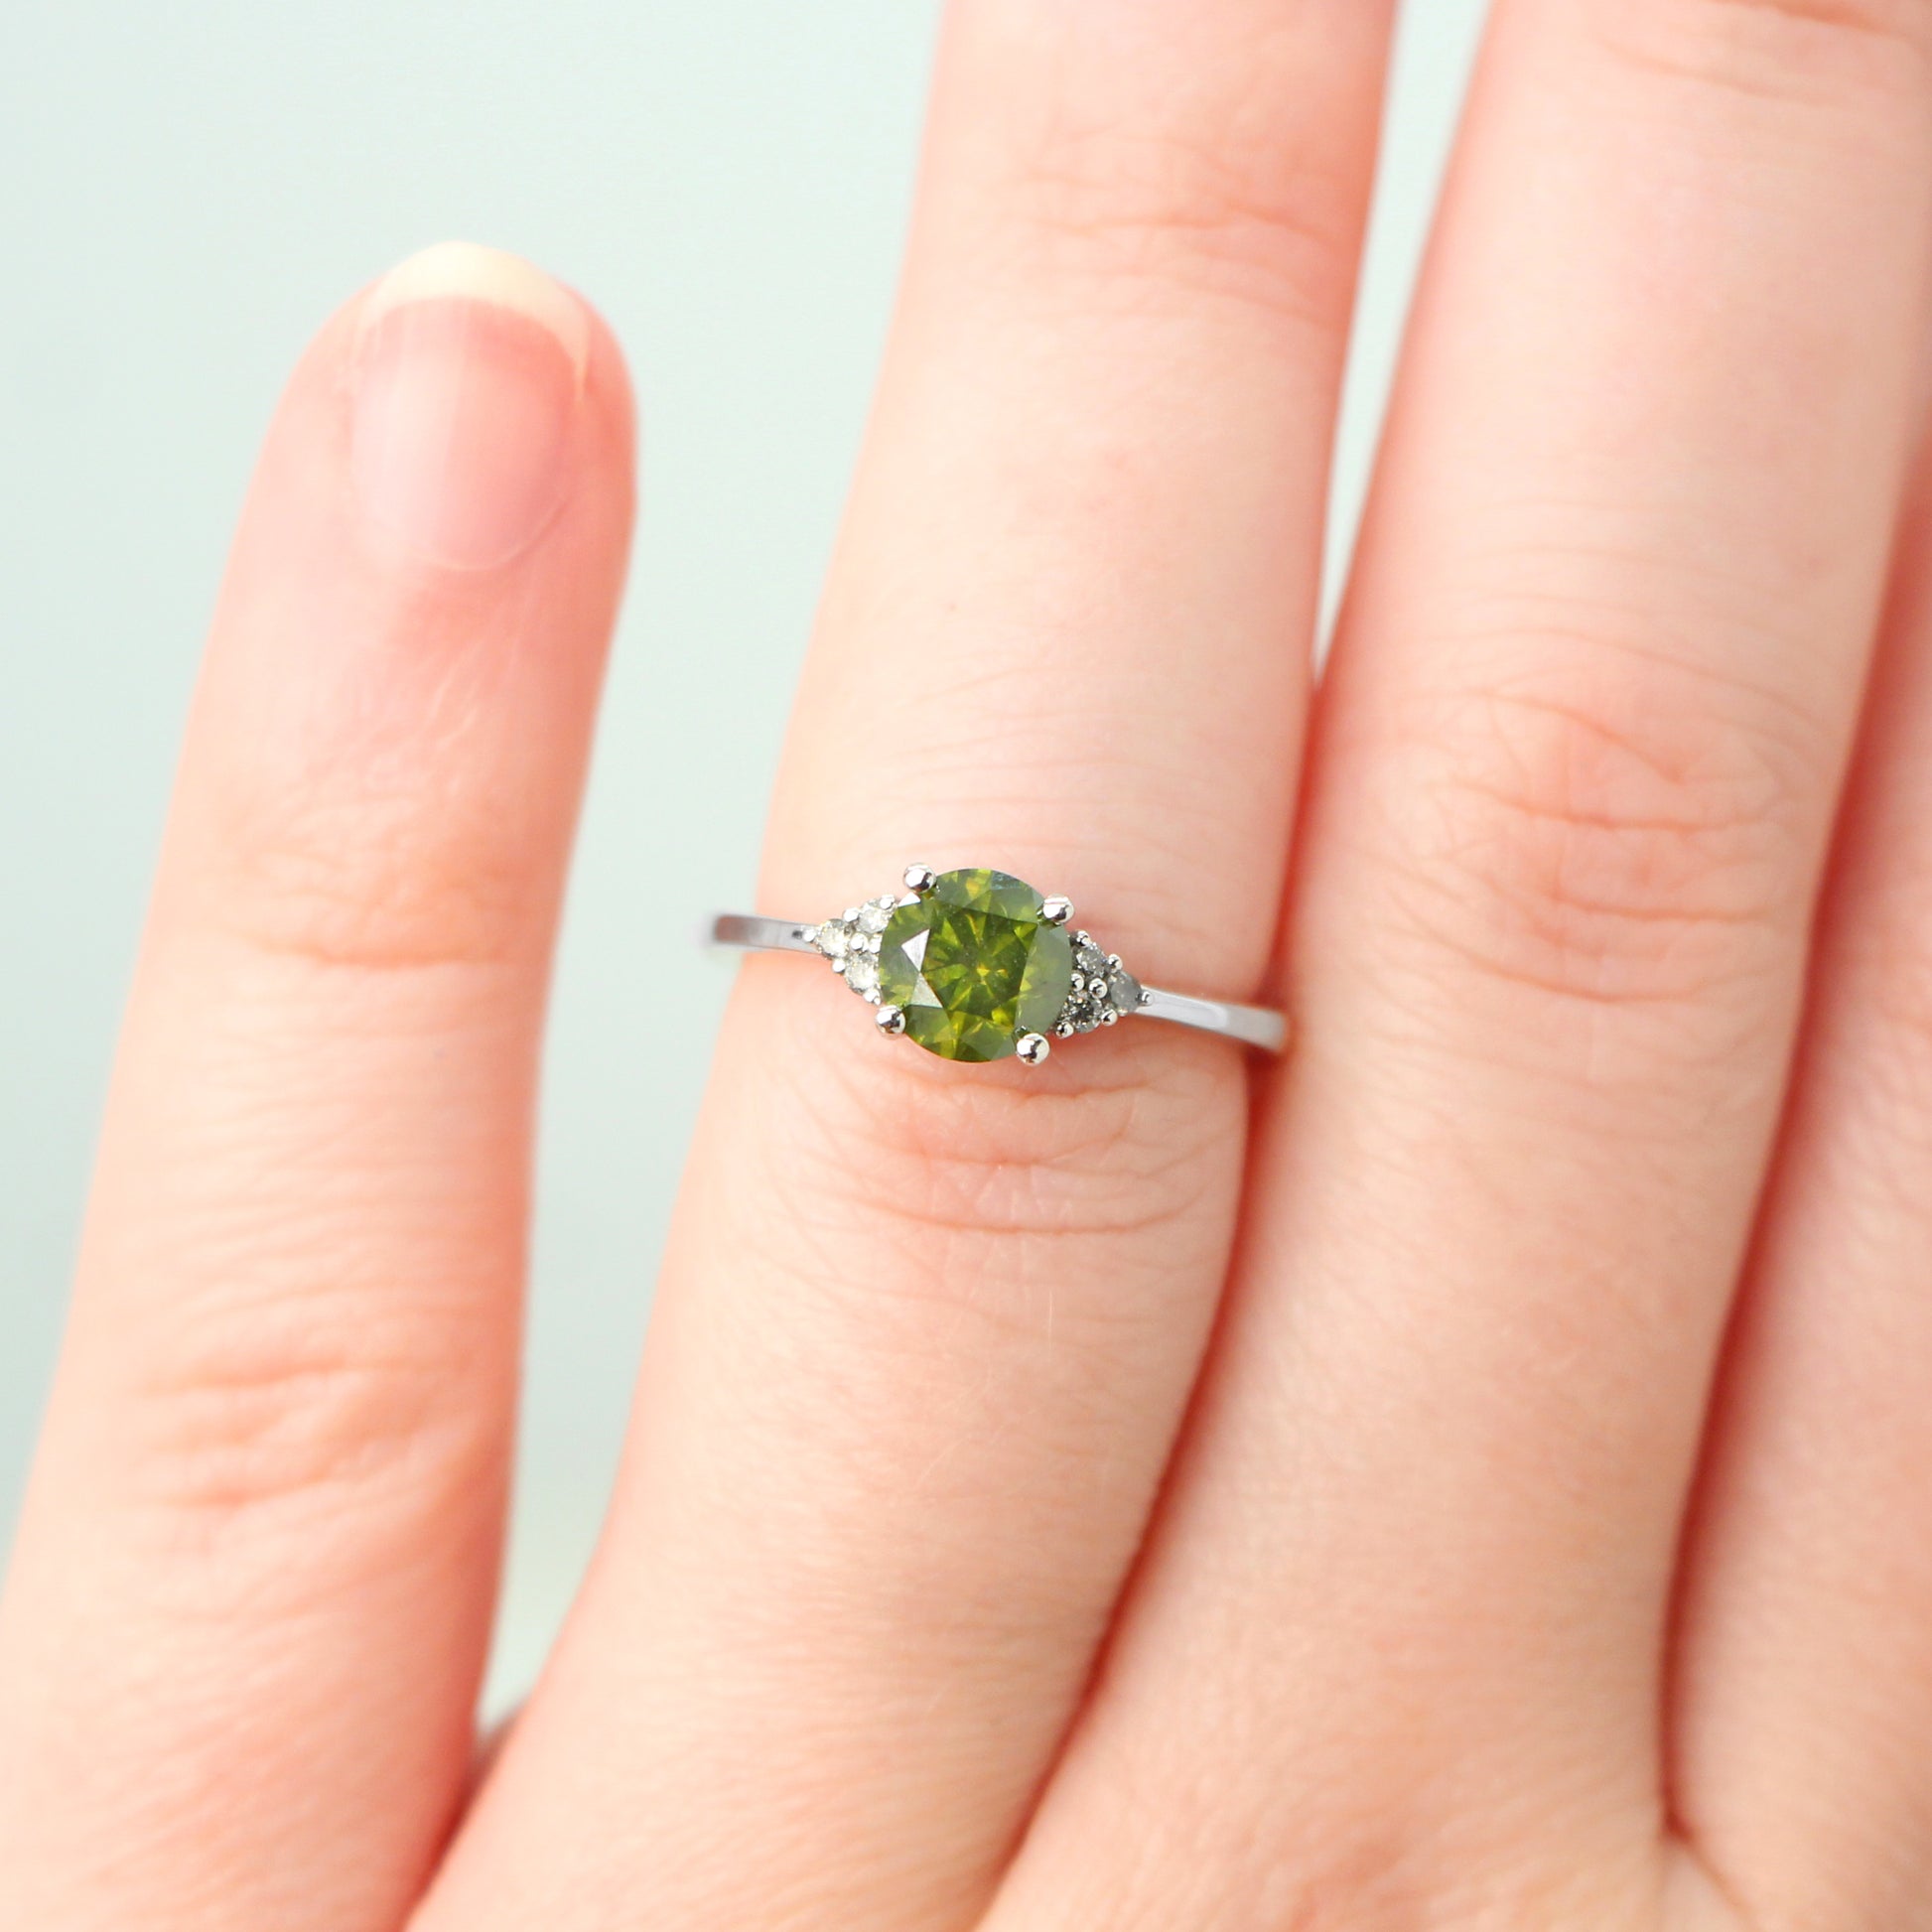 Imogene Ring with a 0.89 Carat Round Dark Green Diamond and Salt and Pepper Accent Diamonds in 14k White Gold - Ready to Size and Ship - Midwinter Co. Alternative Bridal Rings and Modern Fine Jewelry